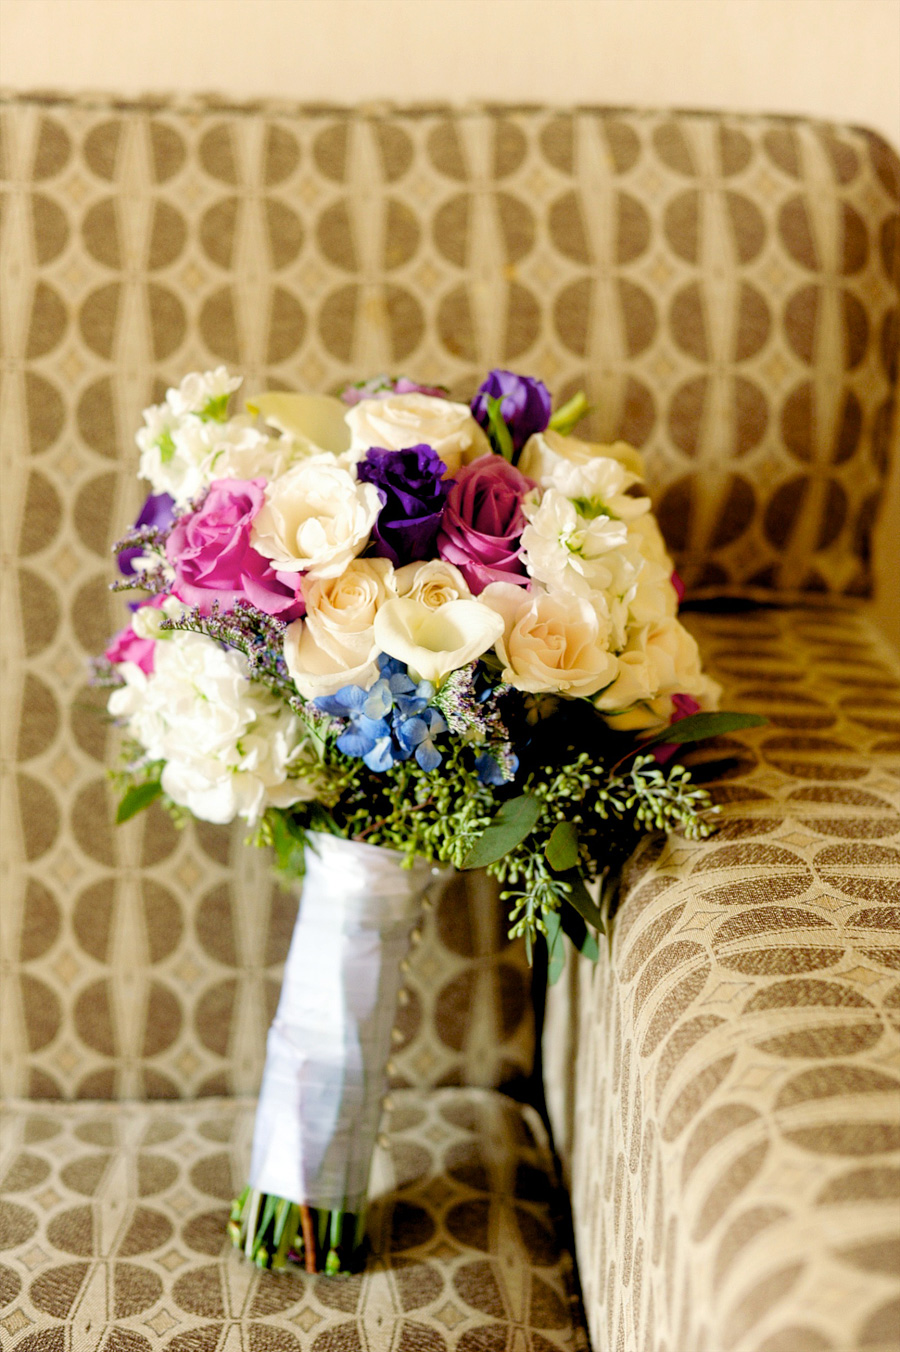 Carin's gorgeous bouquet from Michelle's Florals in Vernon, CT!